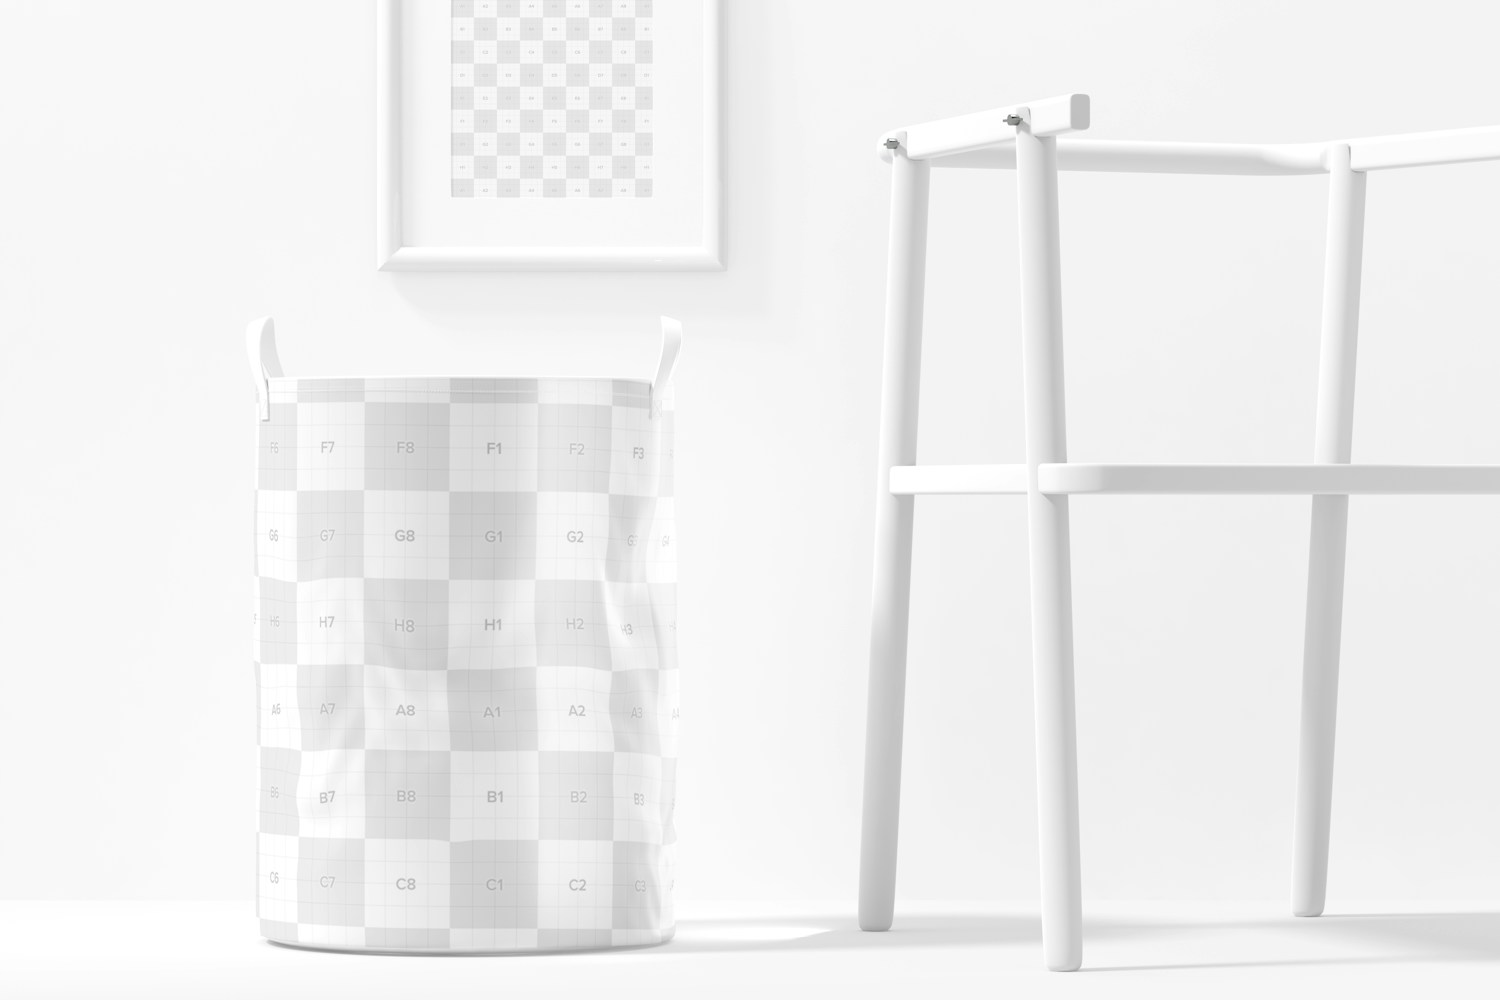 Baby Laundry Hamper Mockup, Front View